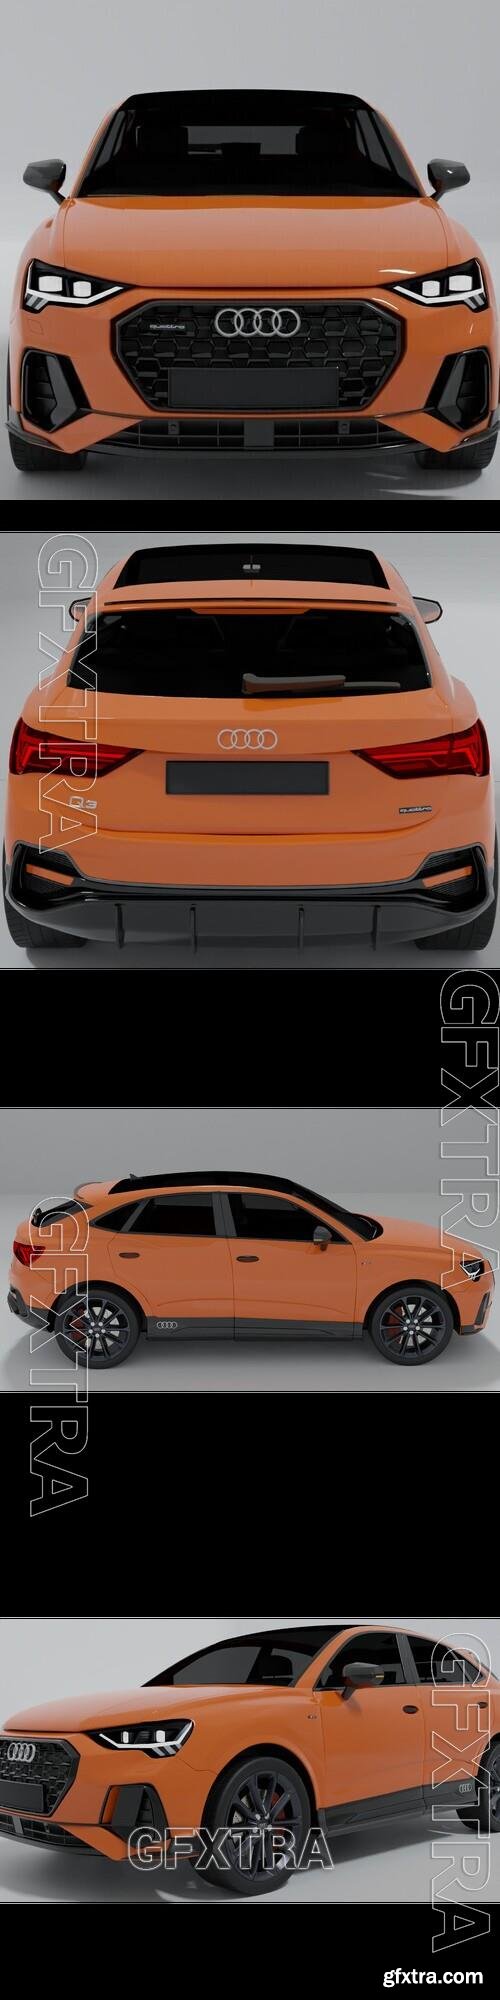 Urban vehicle audi Q3 obj file ready for projects. Model